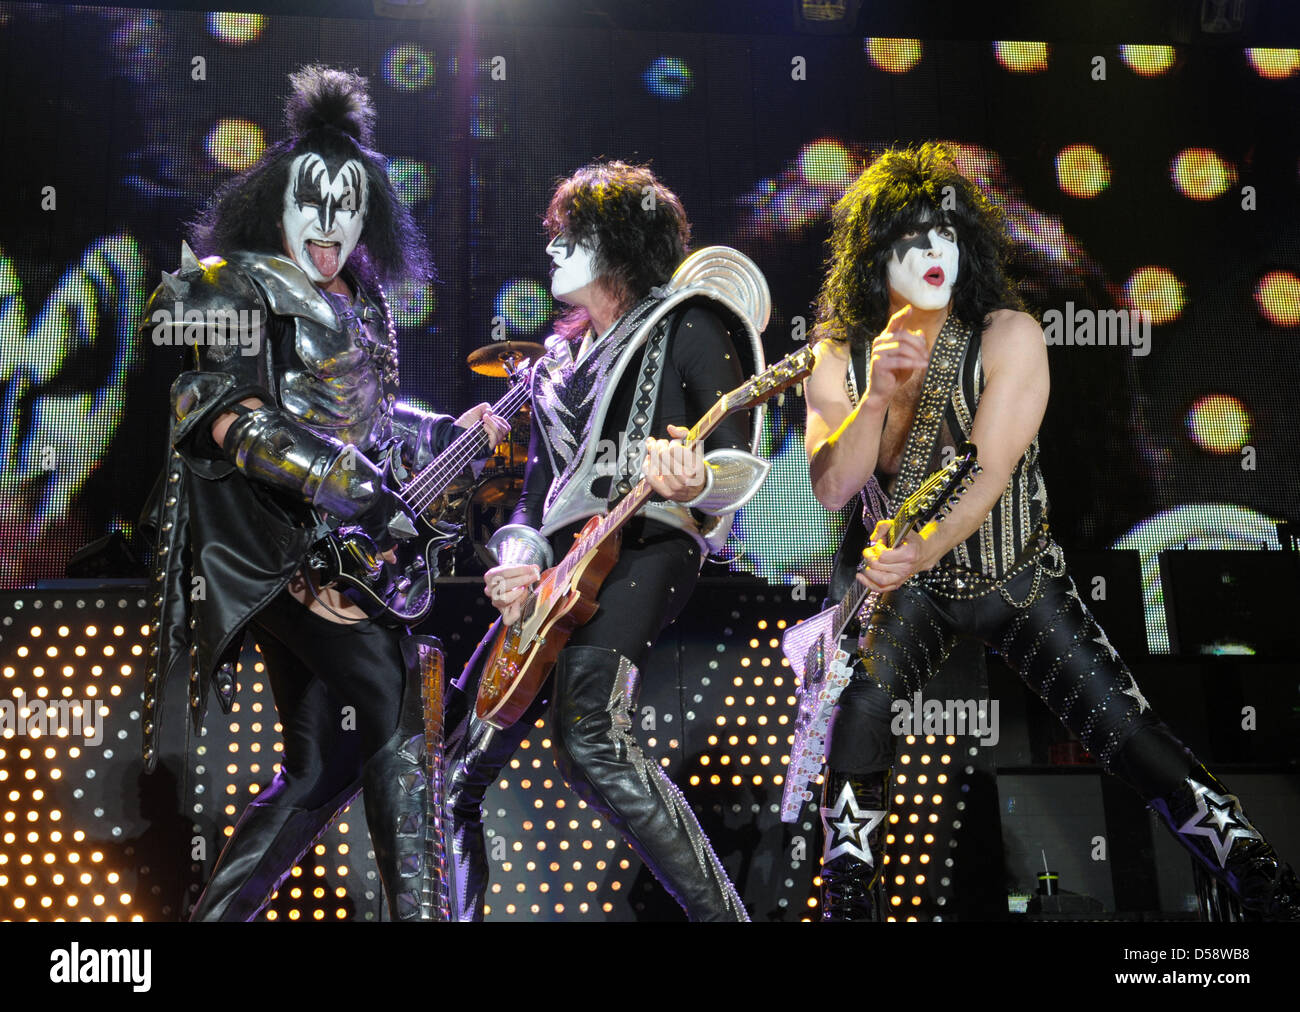 Musicians Gene Simmons (L-R), Tommy Thayer and Paul Stanley of US hard rock band Kiss perform during a concert at Arena Leipzig in Leipzig, Germany, 25 May 2010. The concert is the first of four concerts in Germany of the 'Sonic Boom over Europe Tour' during which Kiss presents their 19th studio album and older hits. Photo: Peter Endig Stock Photo